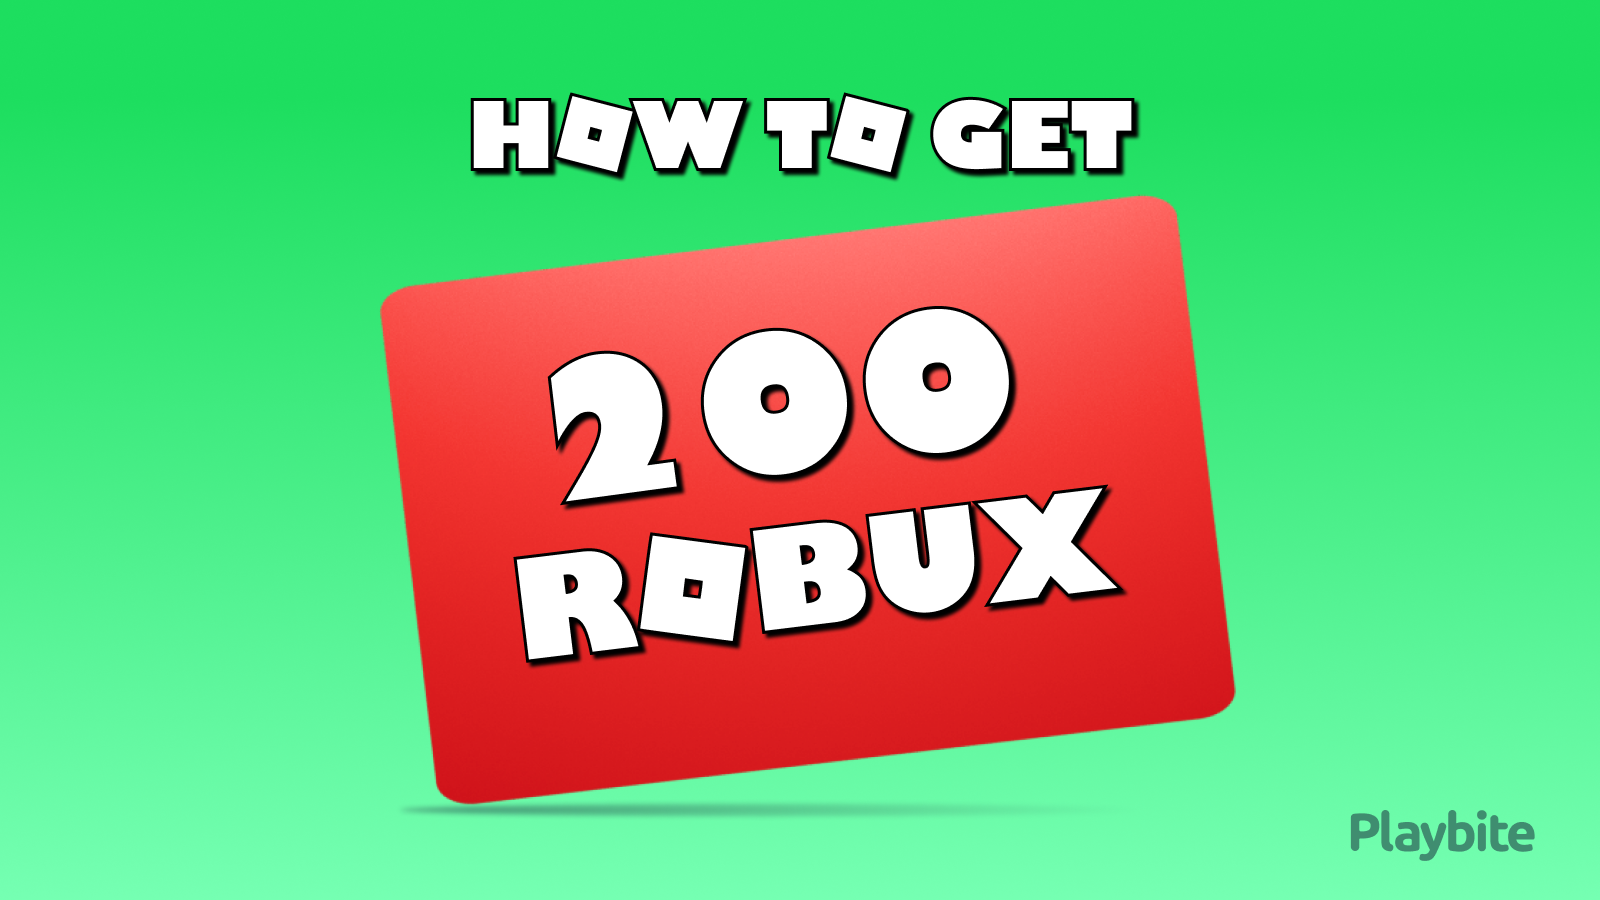 How To Get 200 Robux For Free